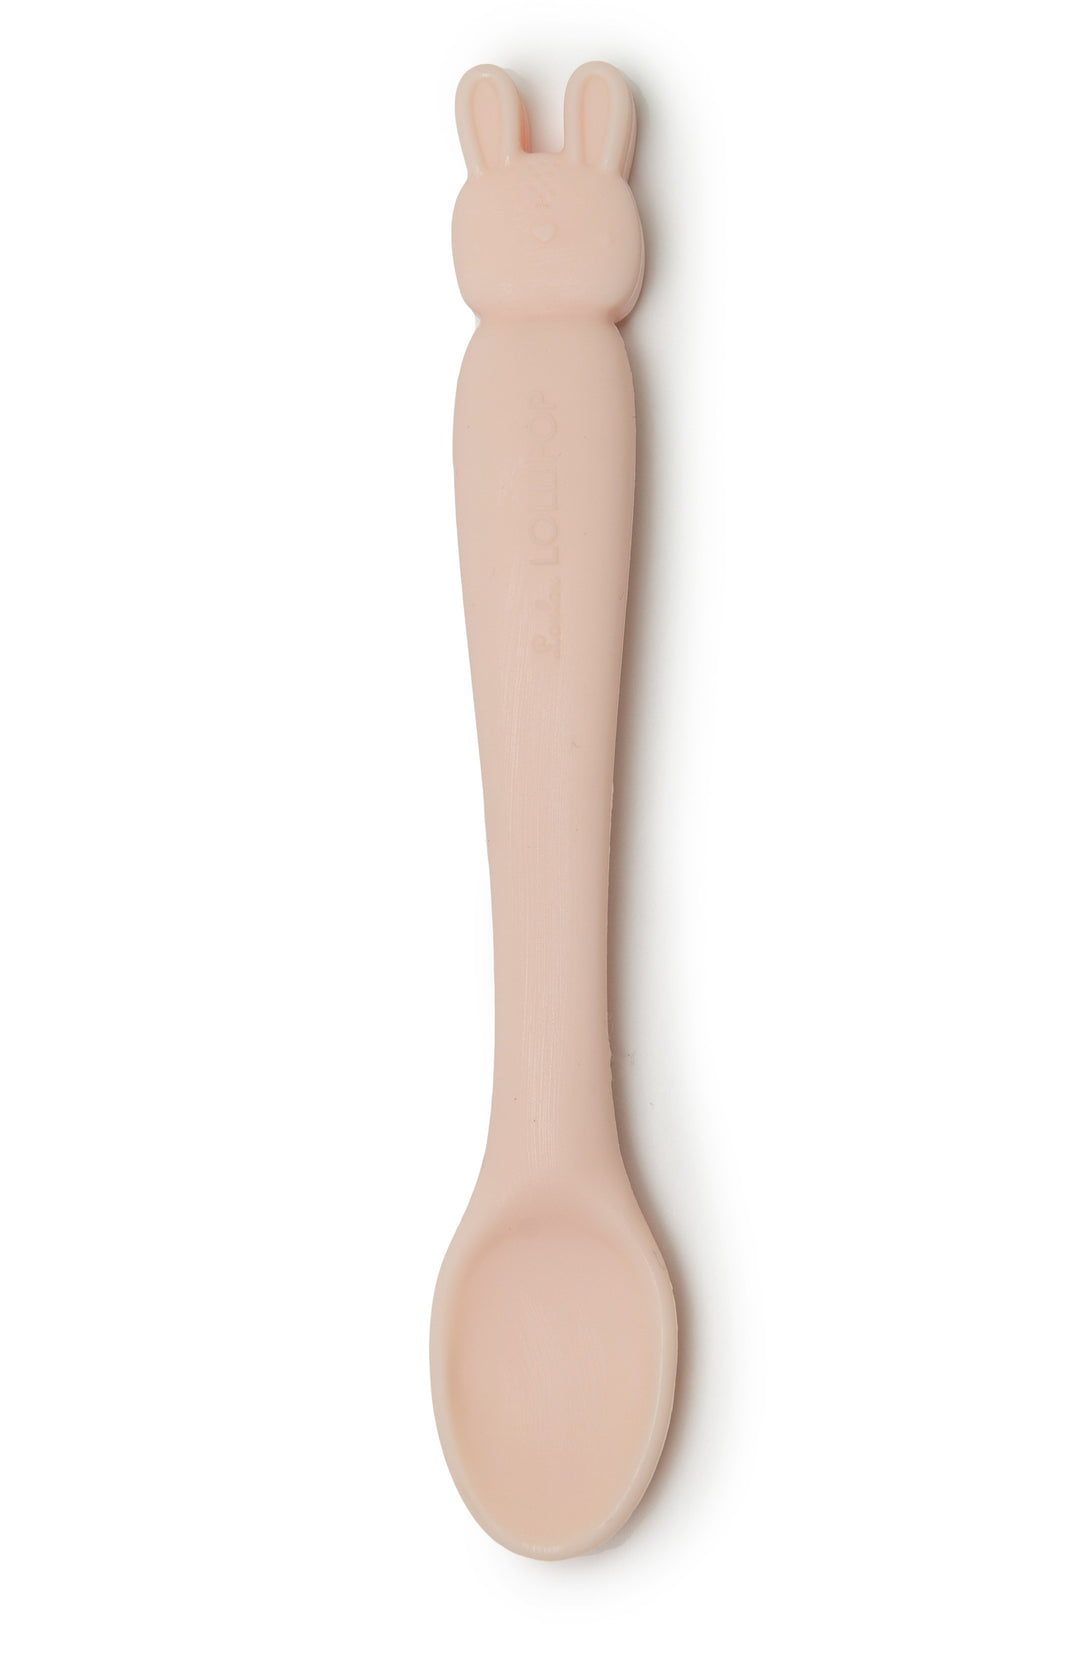 pink bunny Silicone Infant Feeding Spoon from LouLou Lollipop